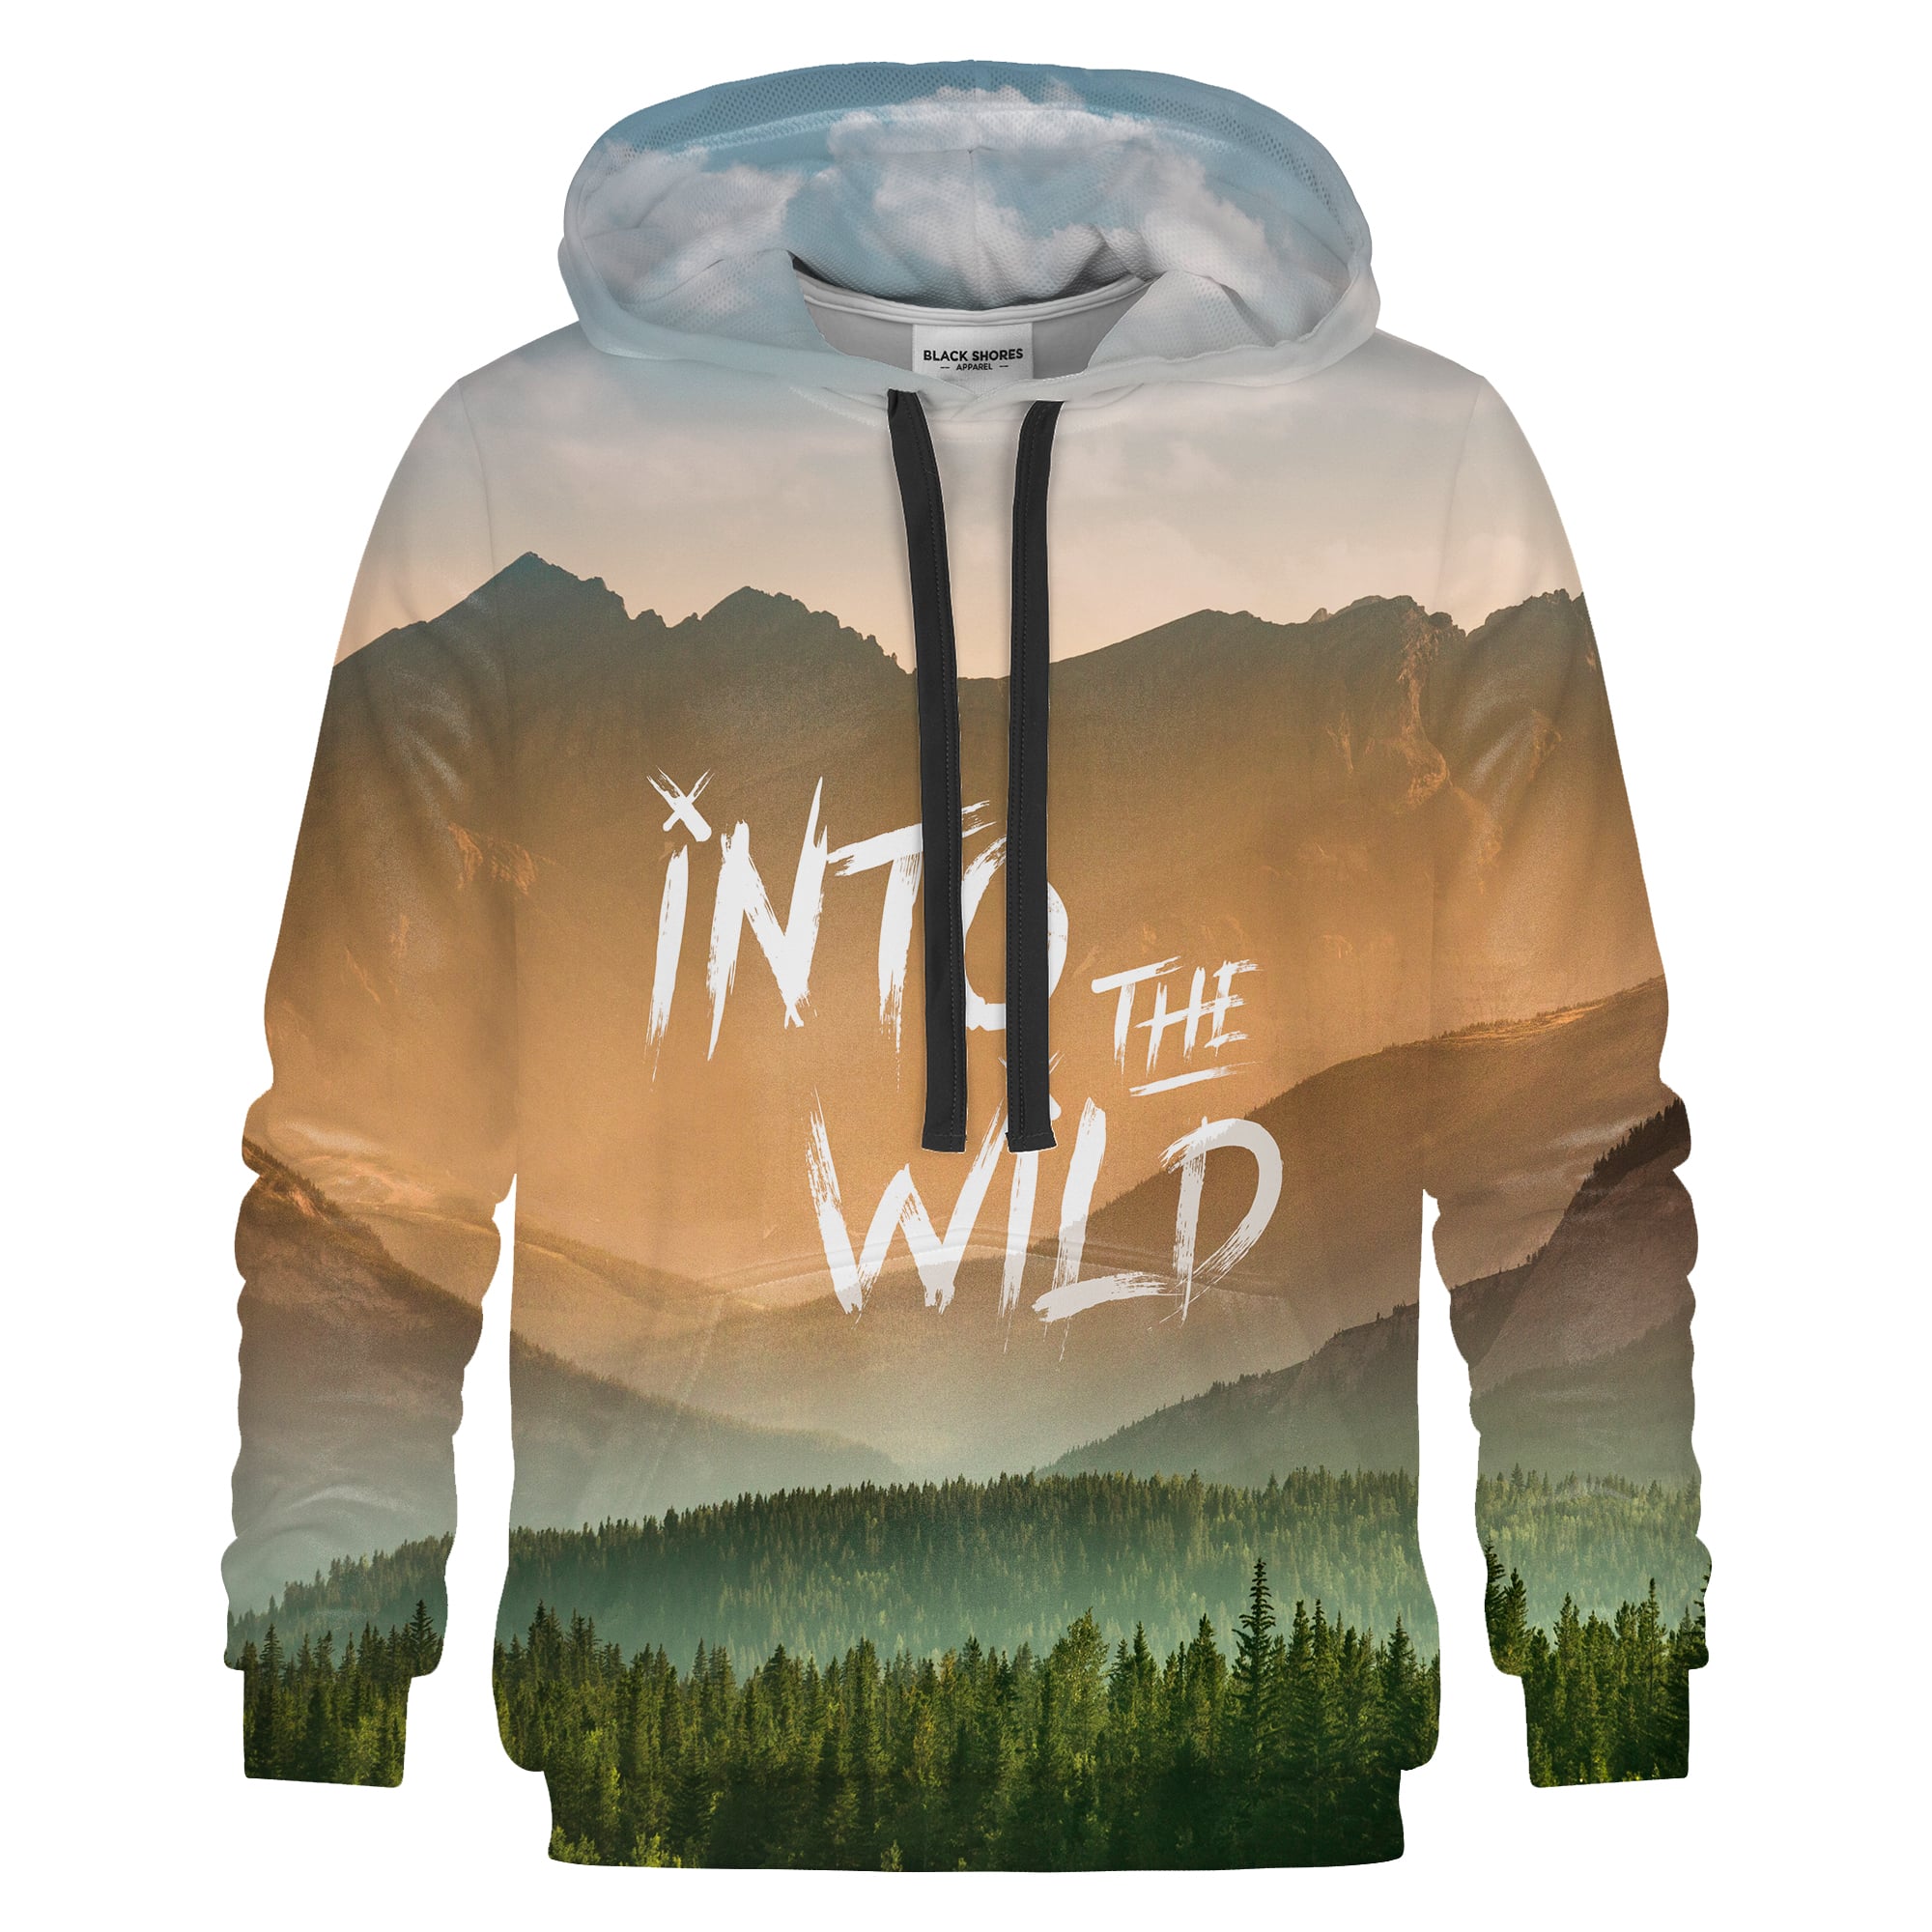 Into The Wild Hoodie - Black Shores - M